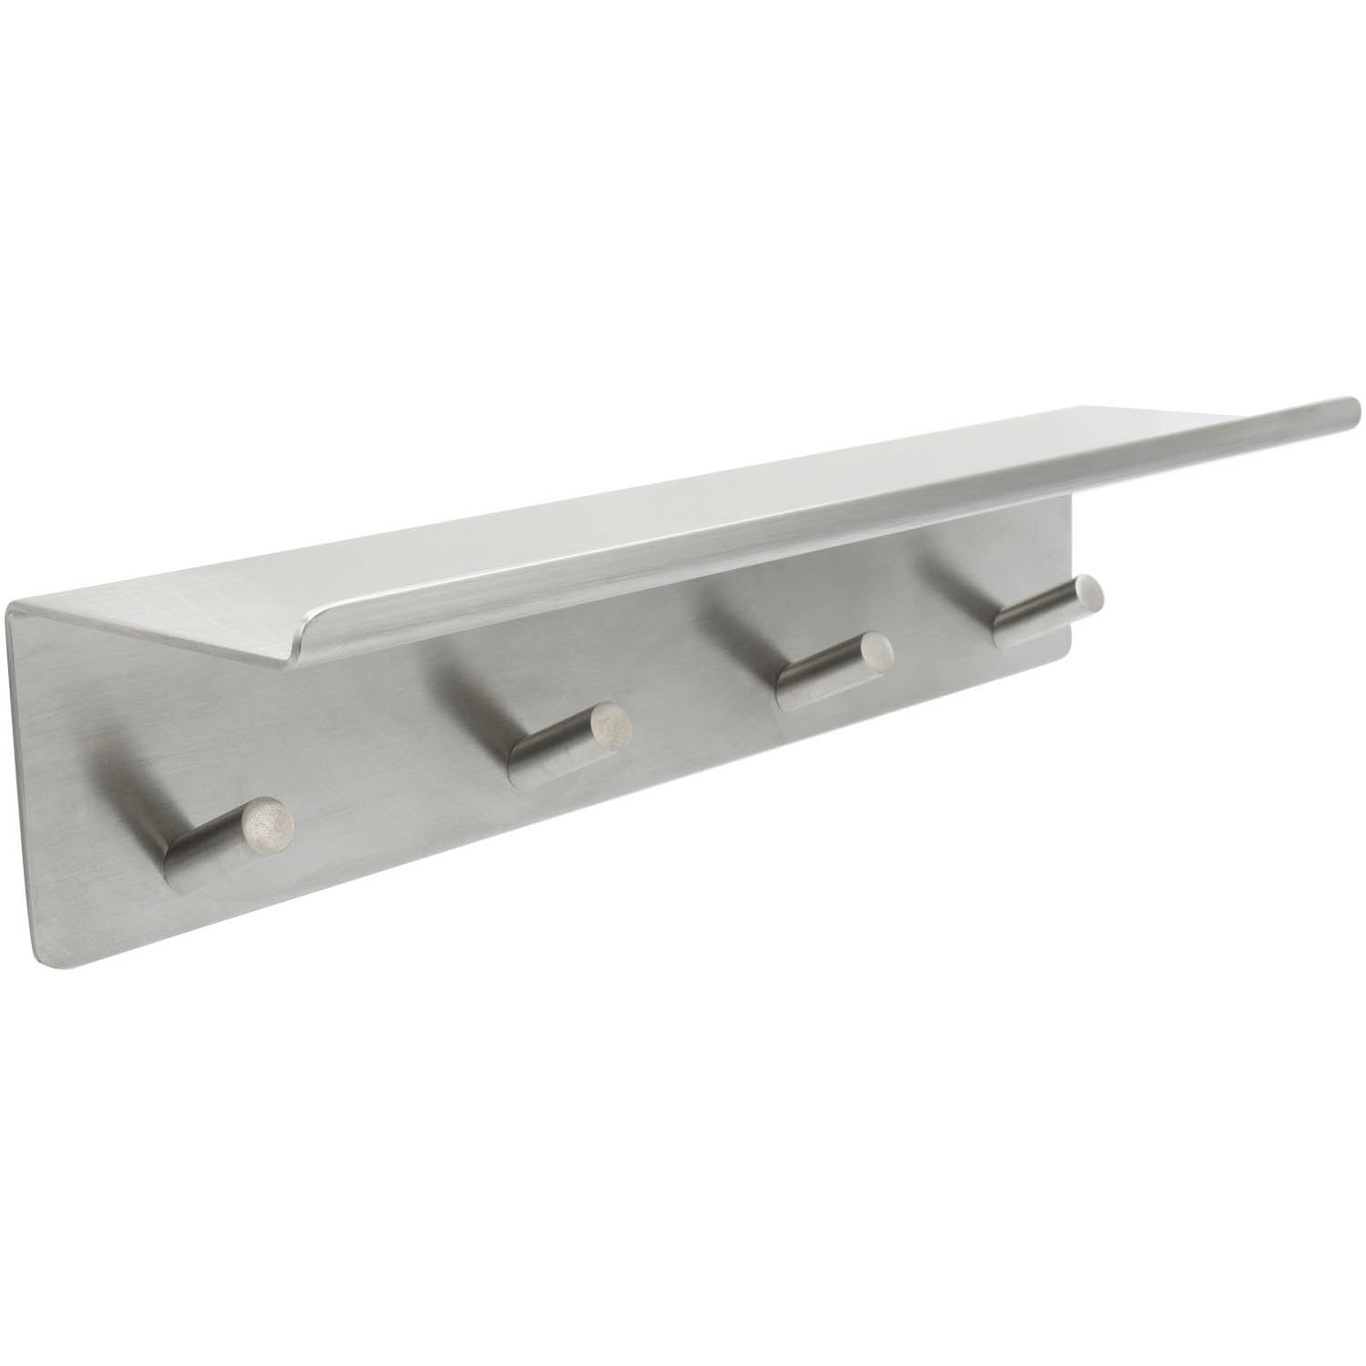 Base Hook Strip With Shelf, Brushed Stainless